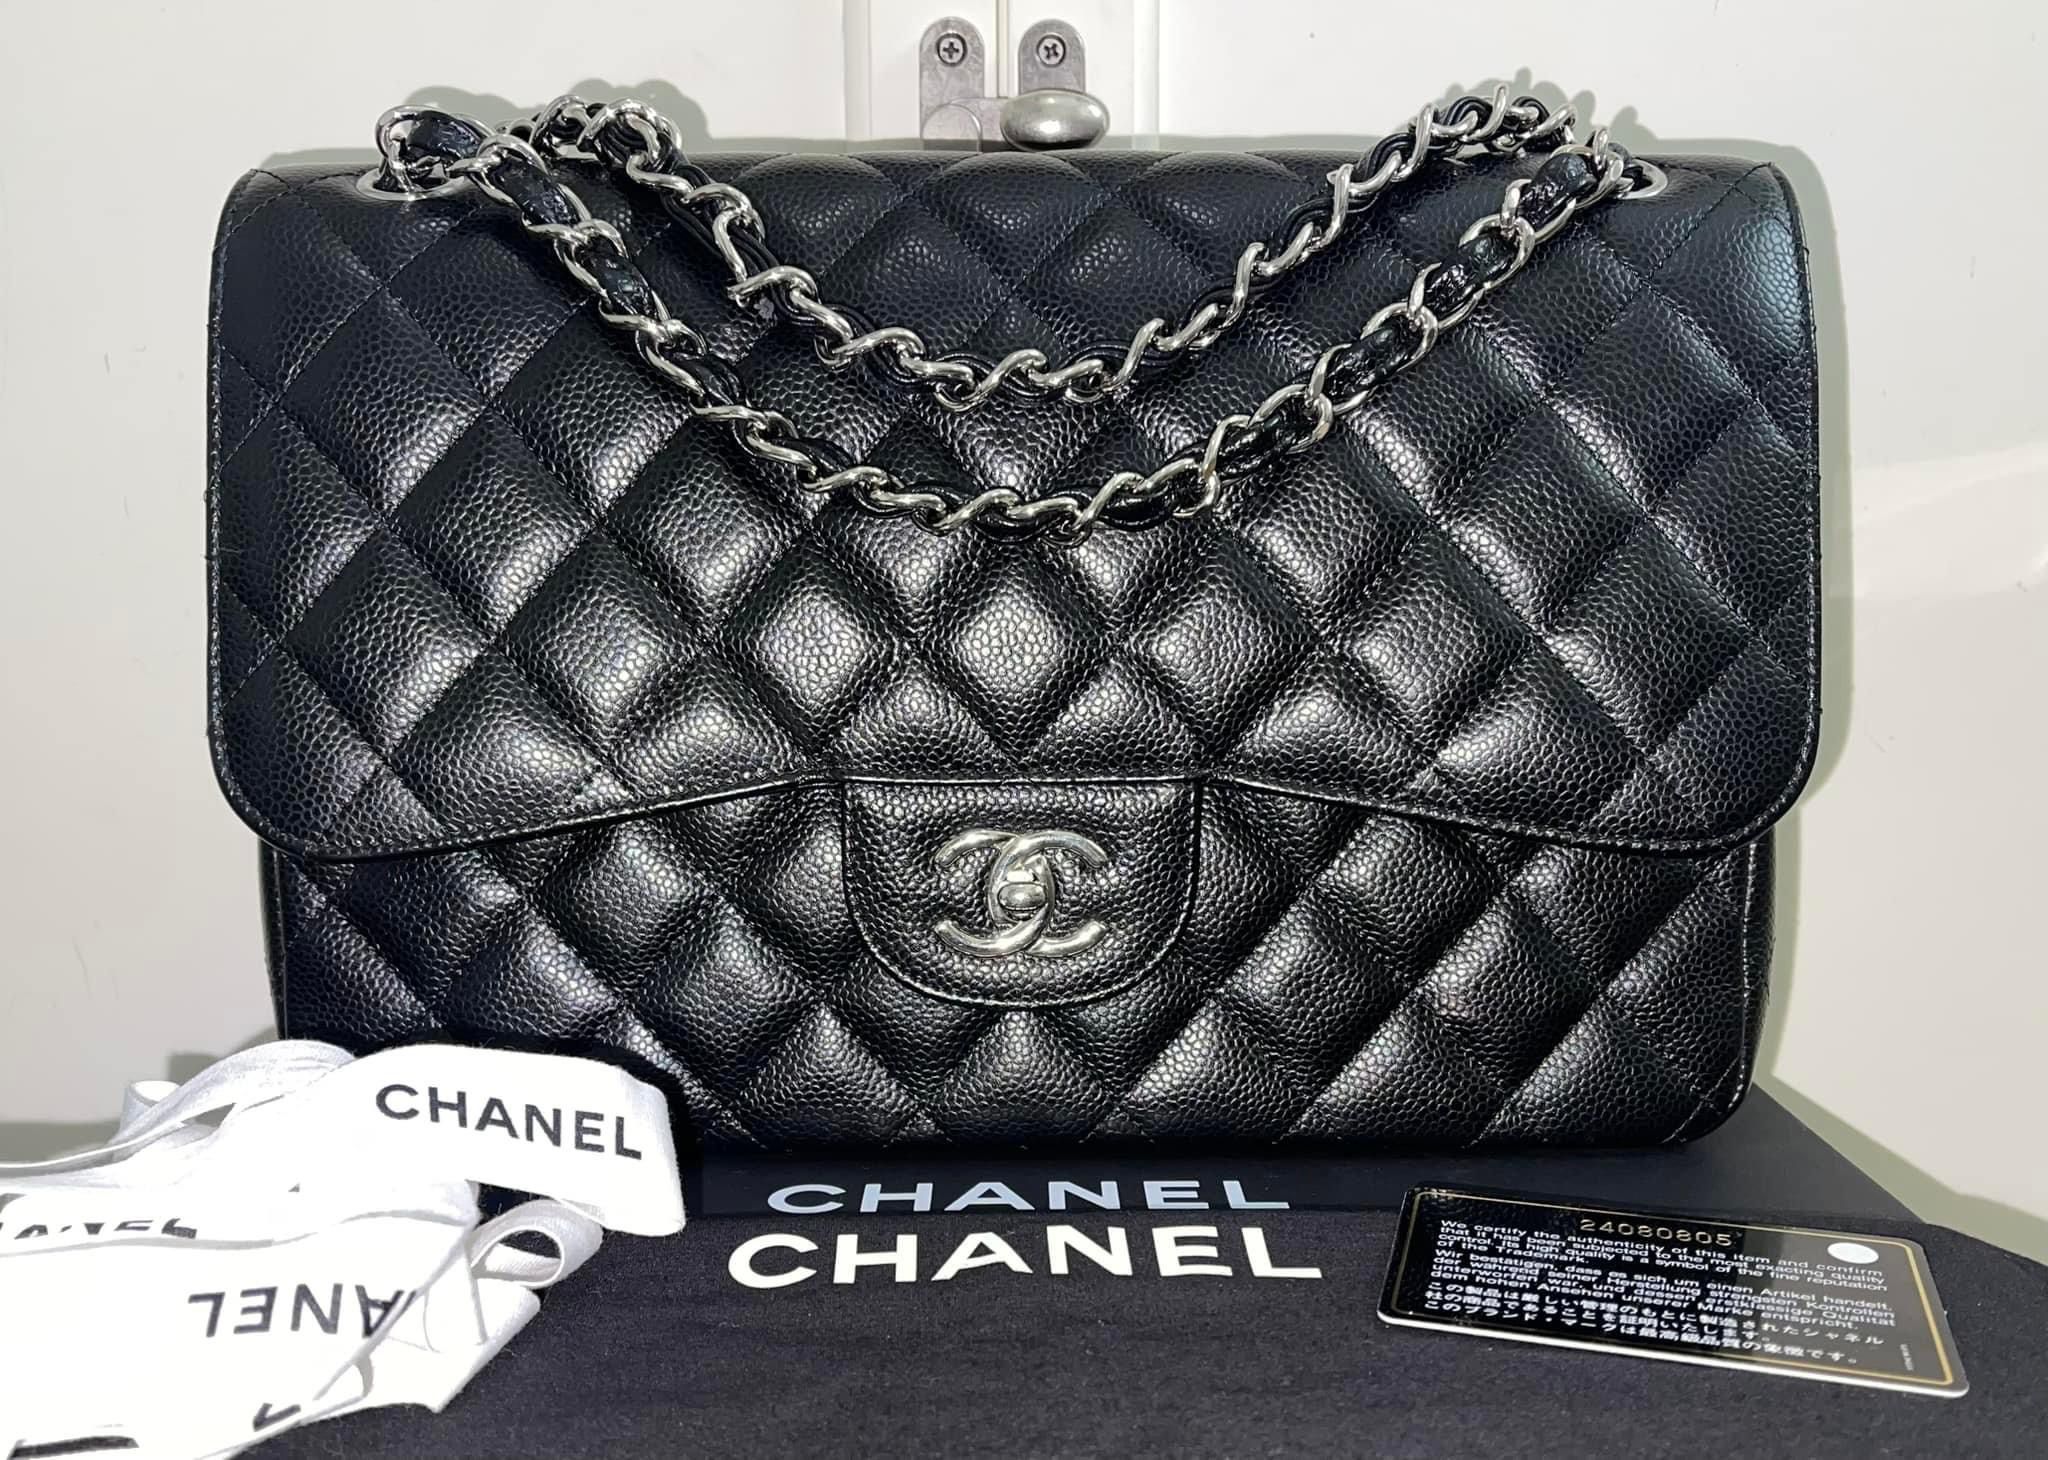 Chanel Jumbo Flap Bag for Sale in Boerne, TX - OfferUp